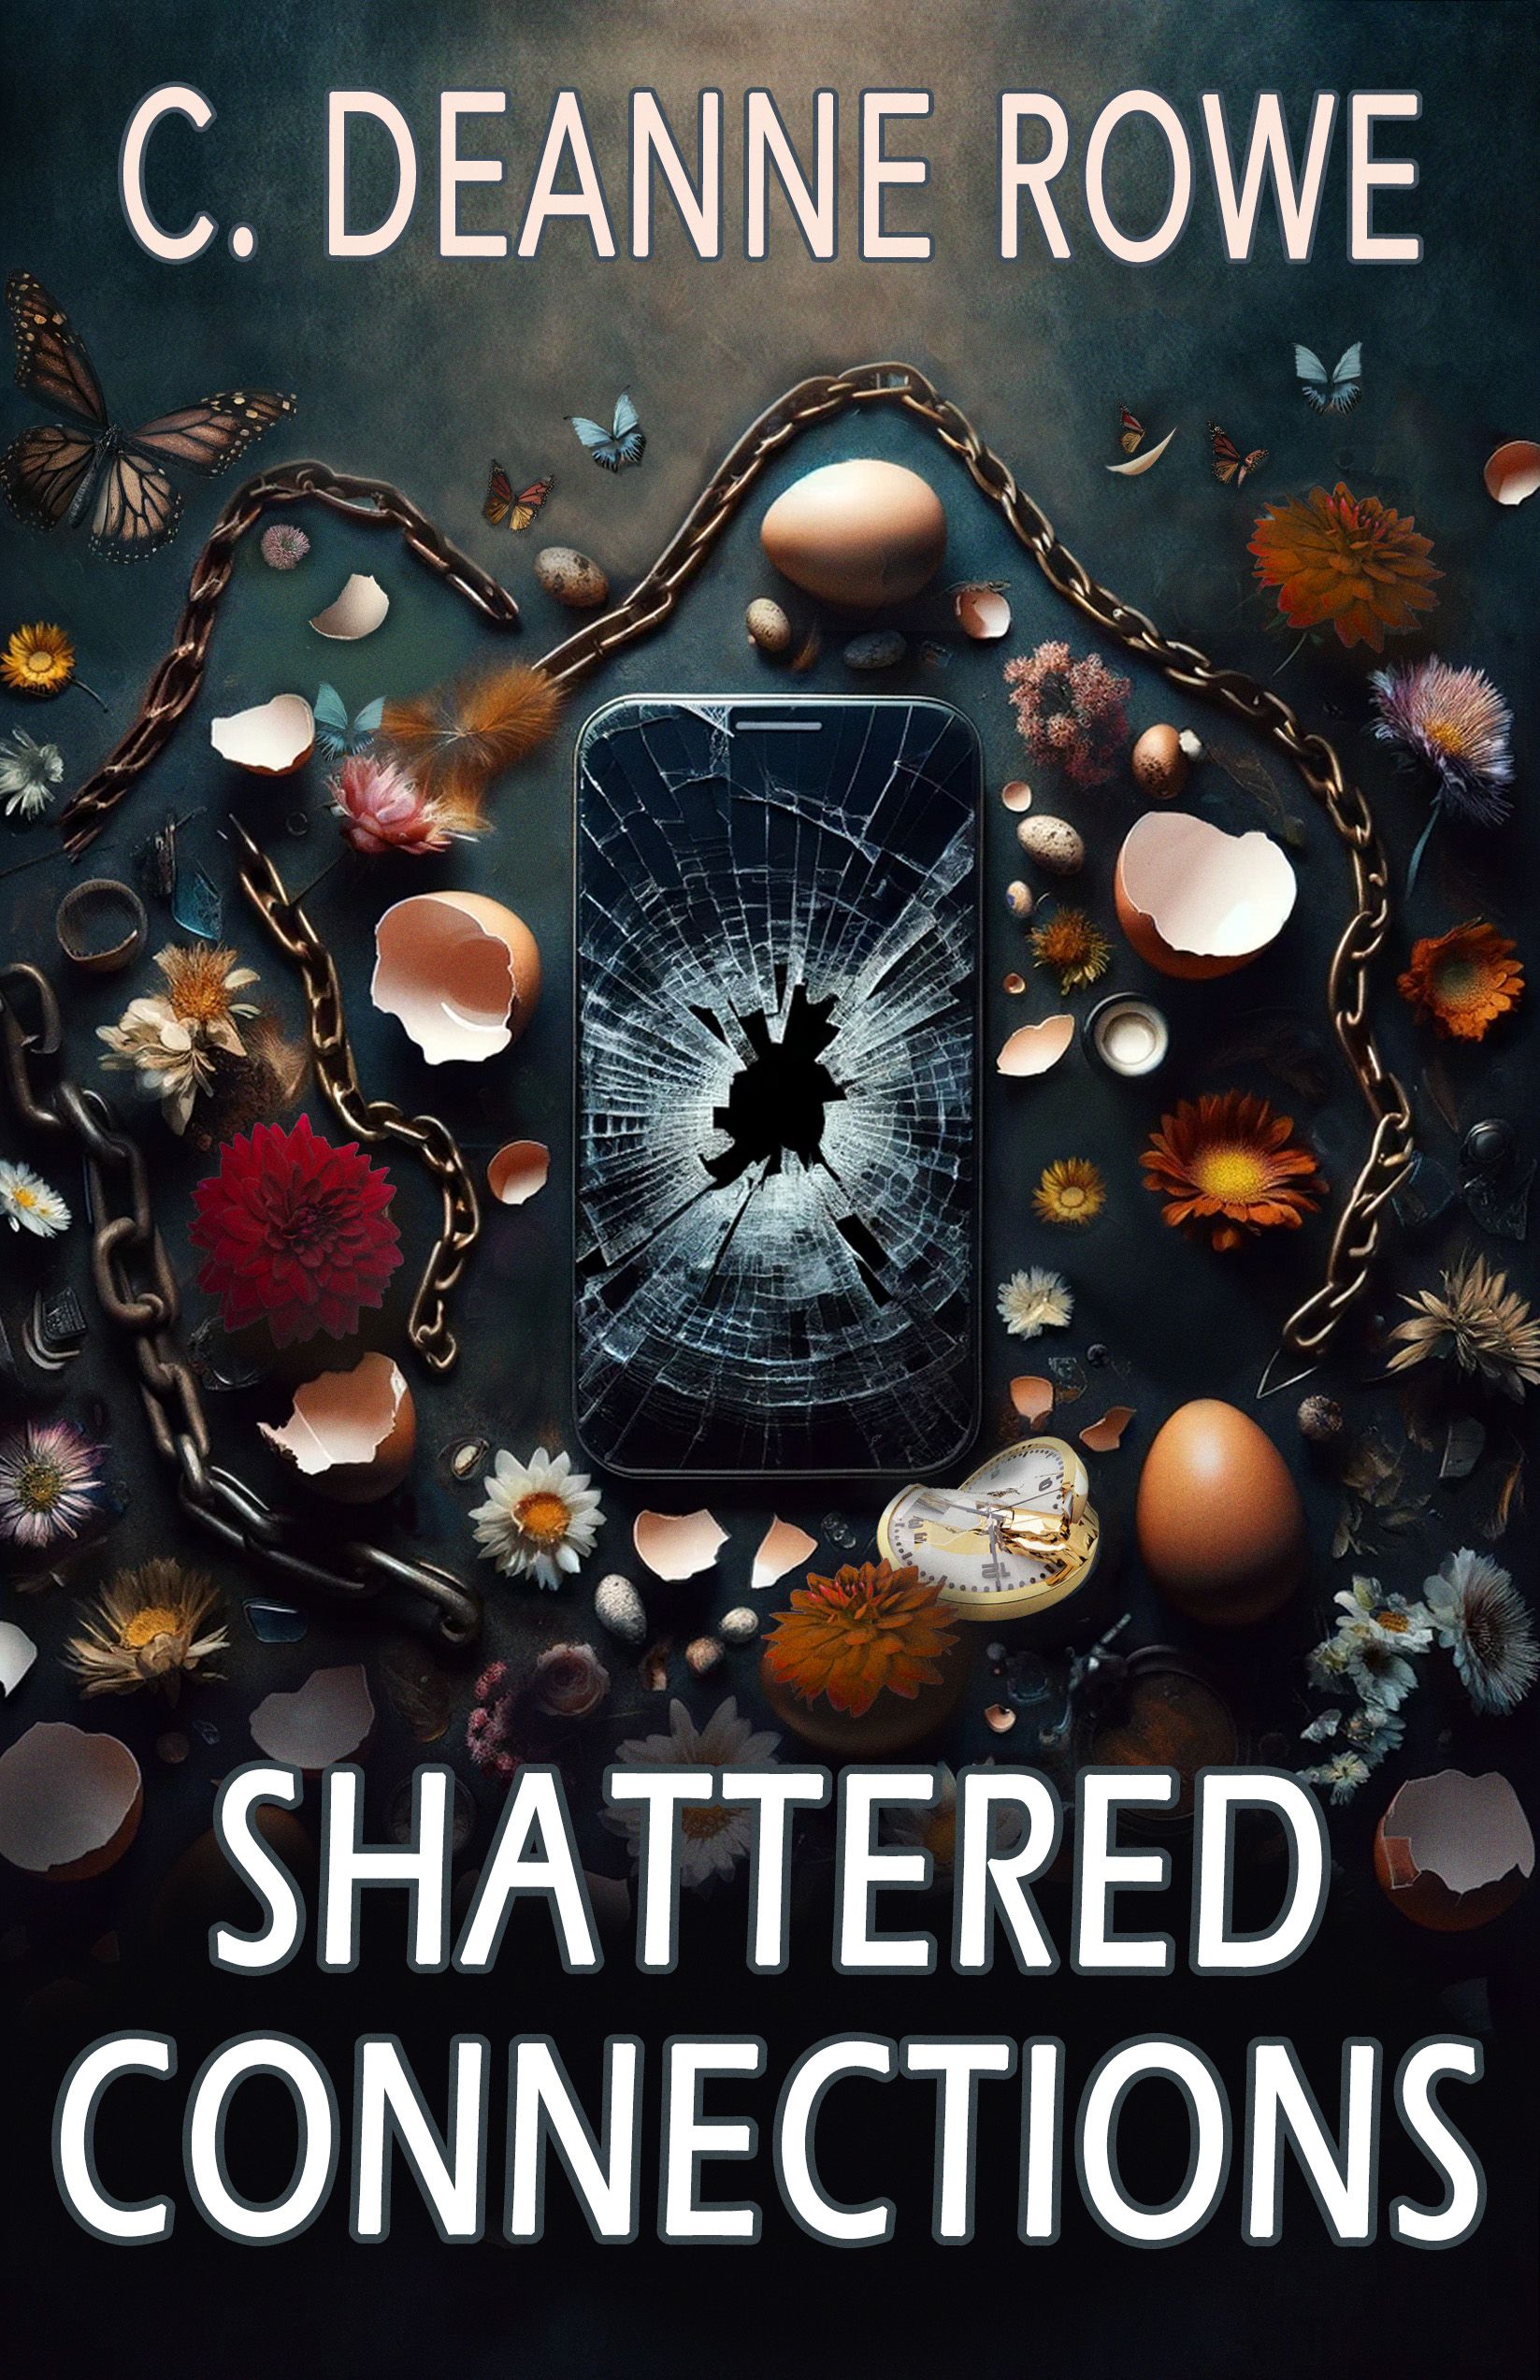 A book cover for shattered connections by c. deanne rowe.